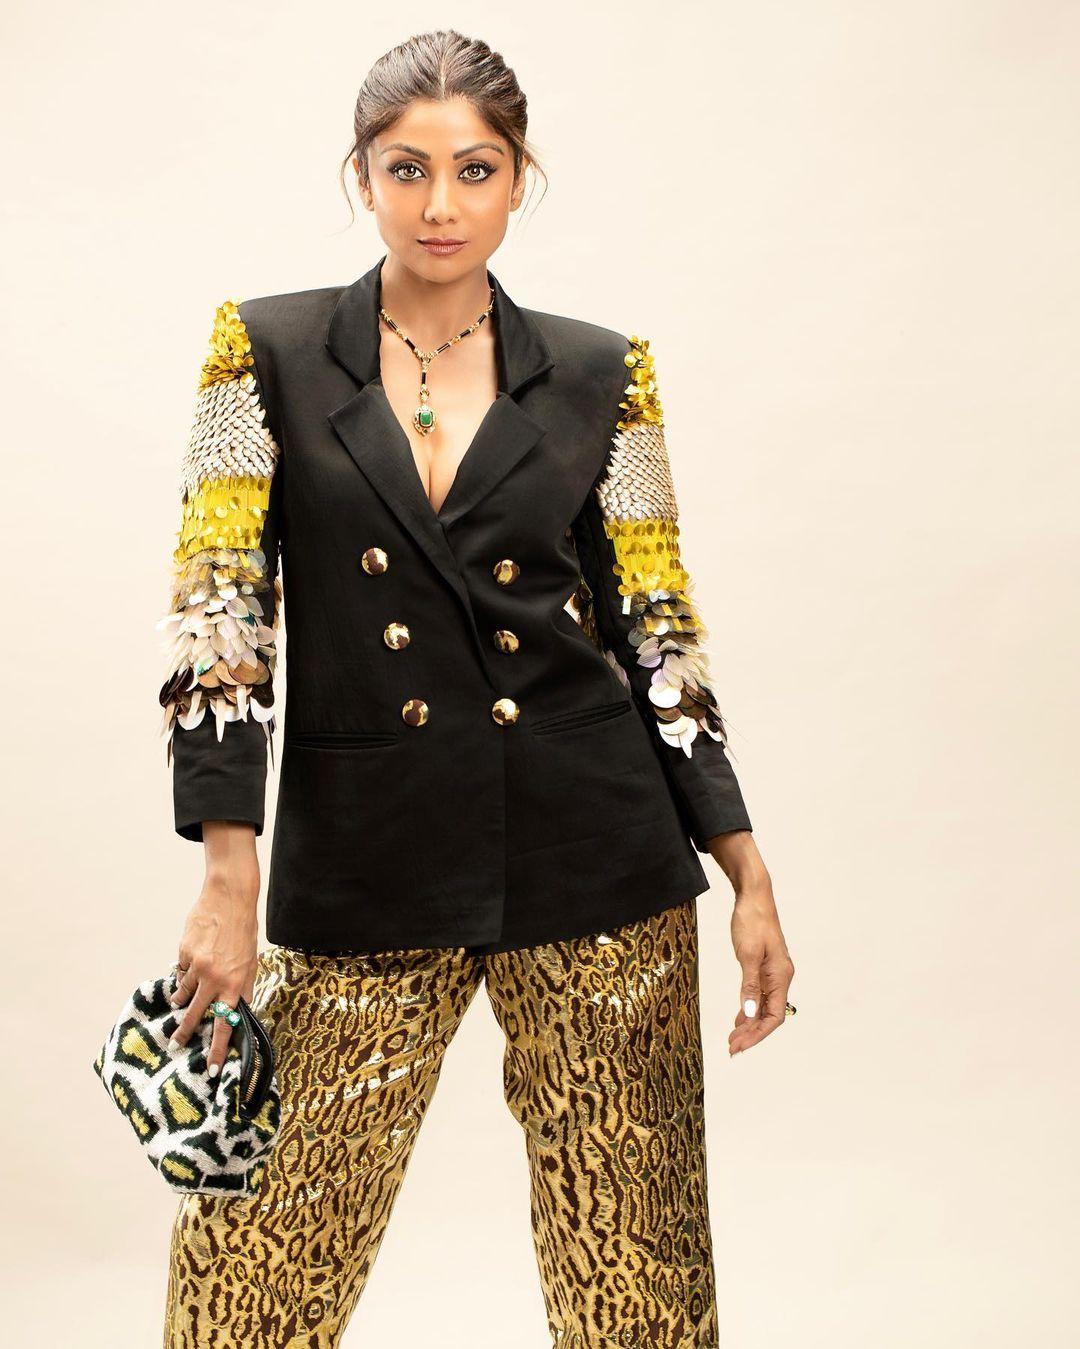 To complete her look, the actress accessorized with a leopard print clutch.